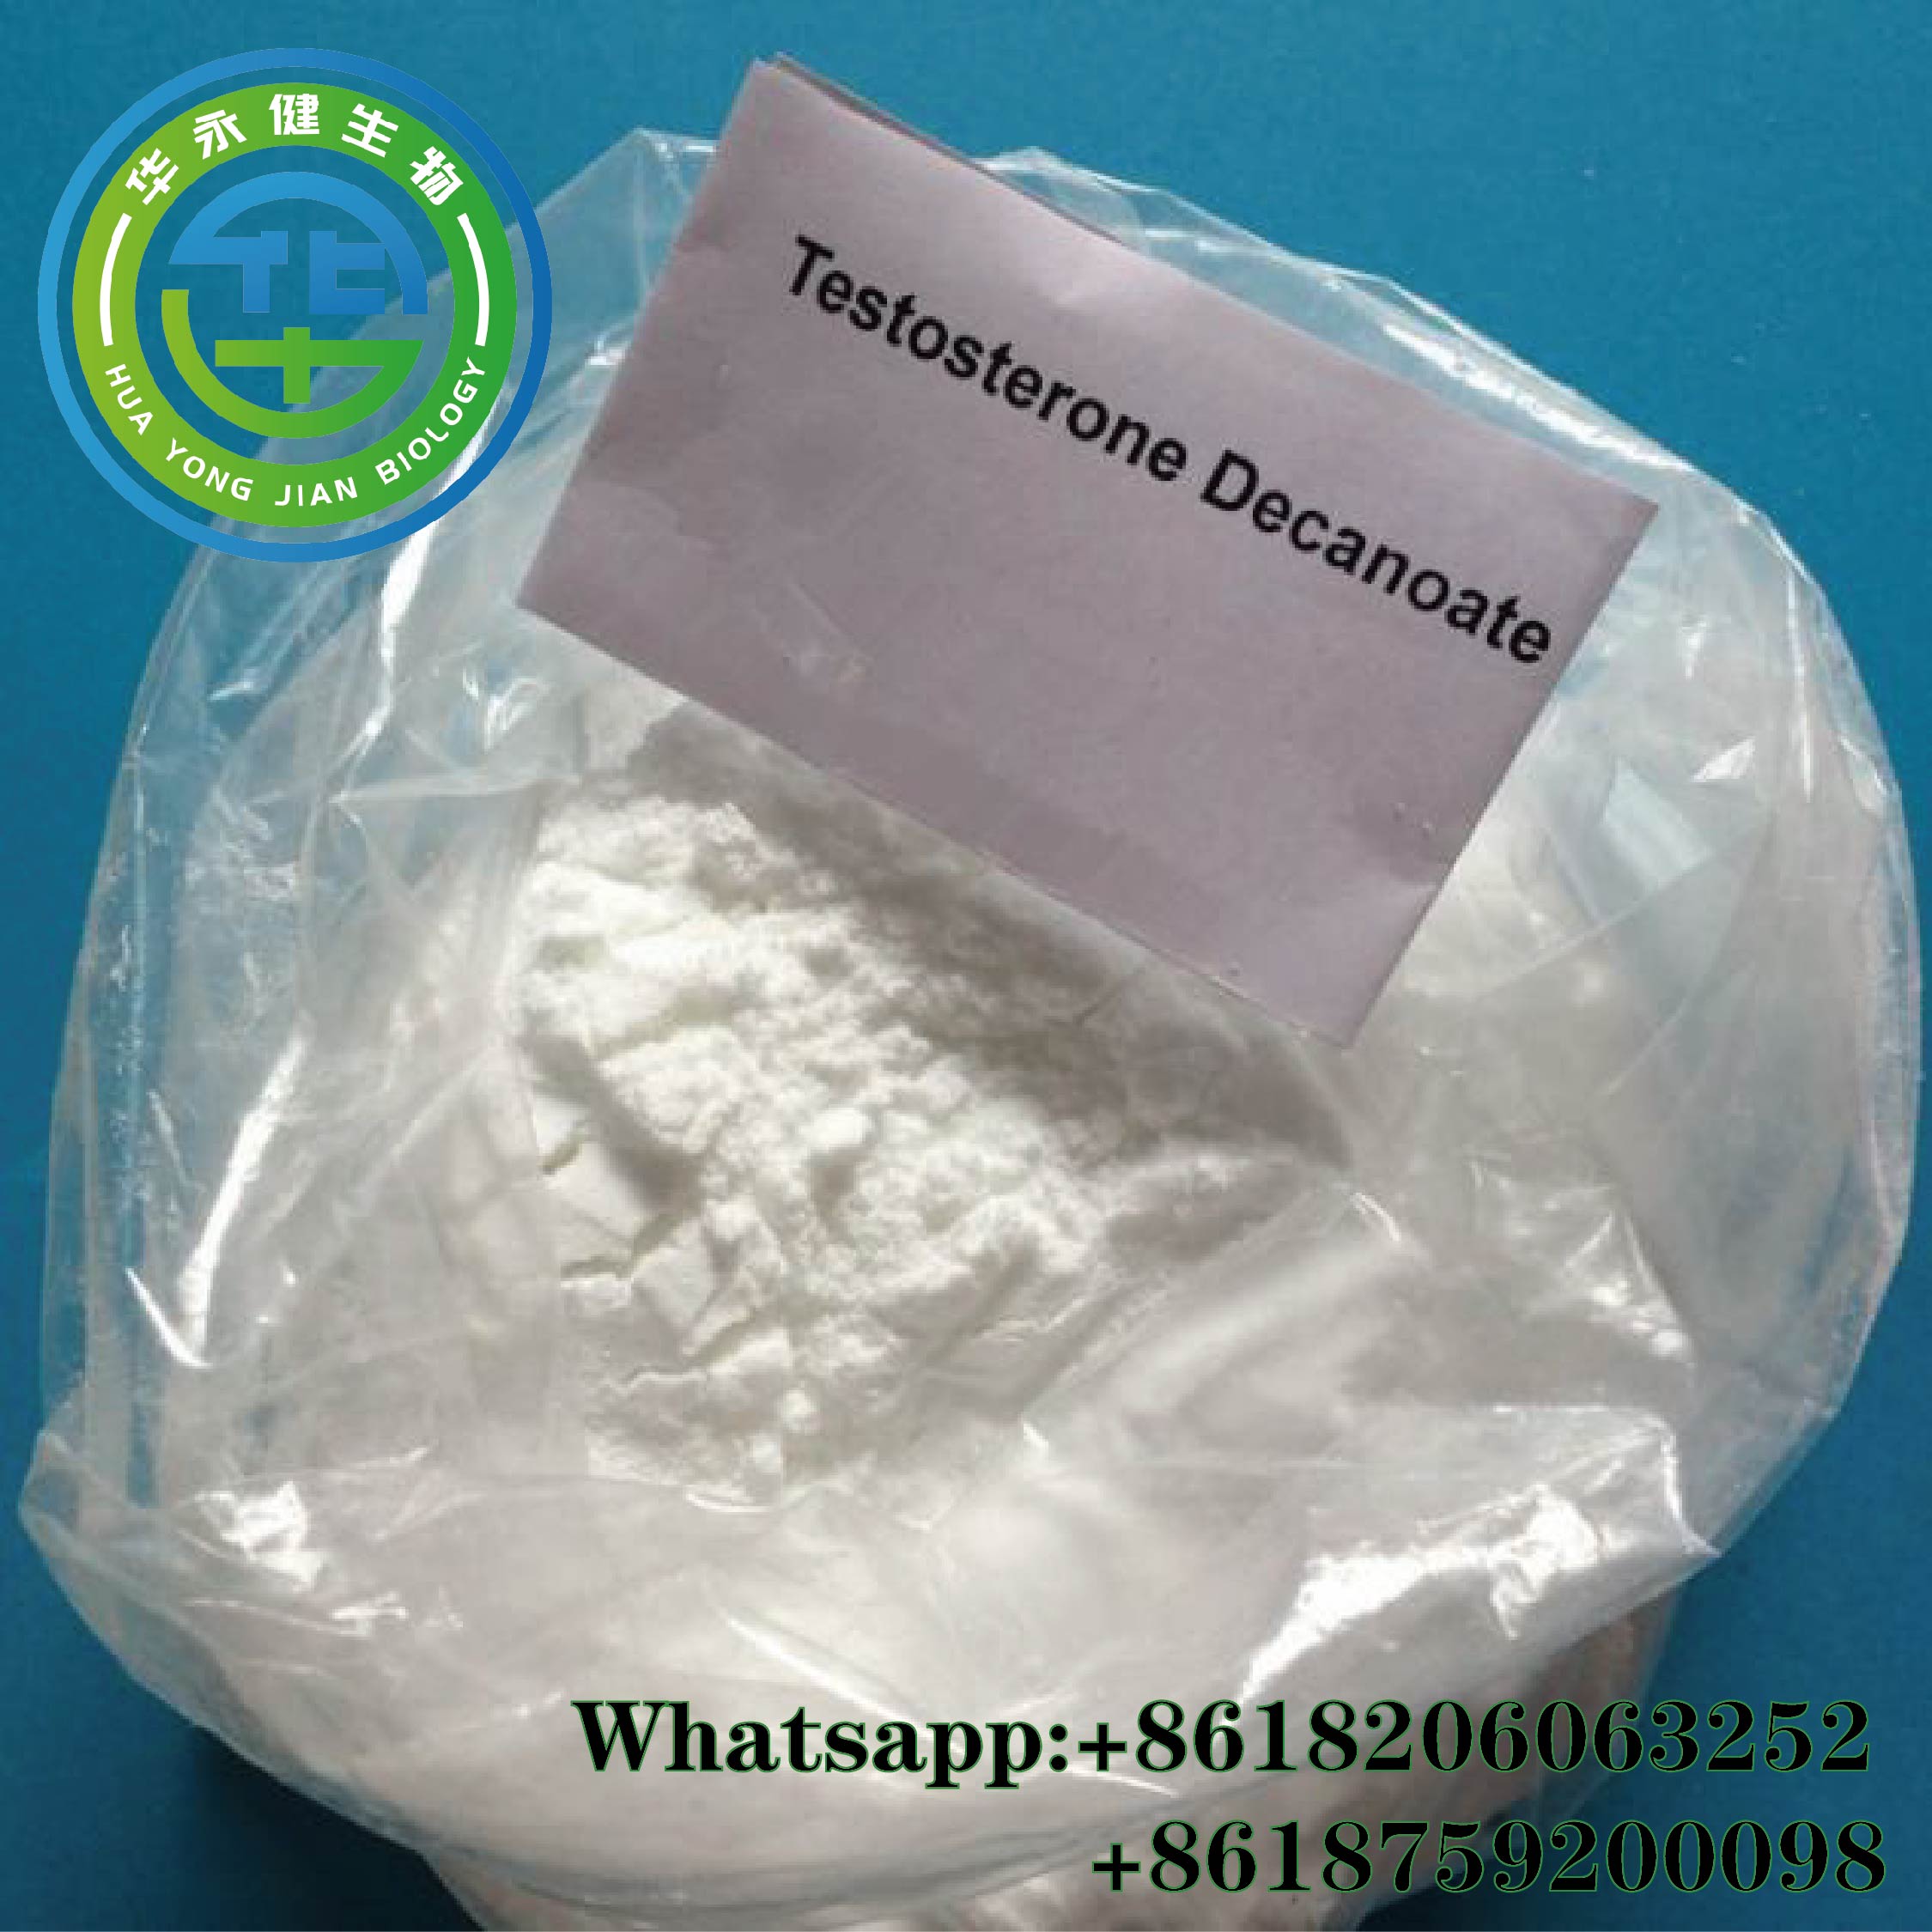  Test D Raw Steroid White Powder Testosterone DECA For Body Building Testosterone Decanoate CasNO.5721-91-5